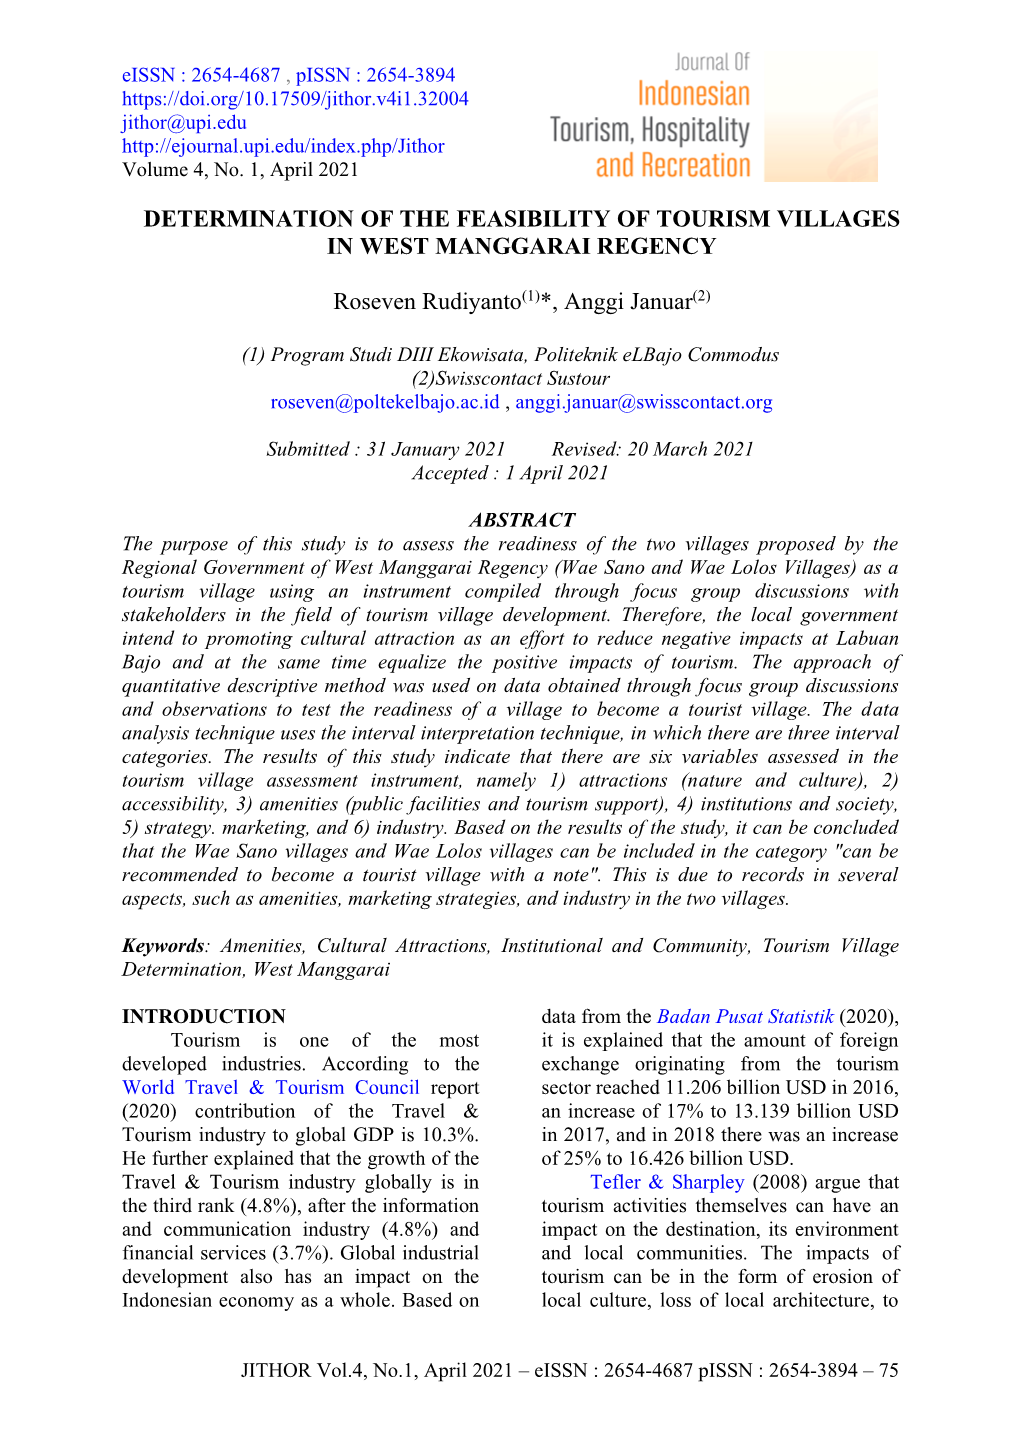 Determination of the Feasibility of Tourism Villages in West Manggarai Regency